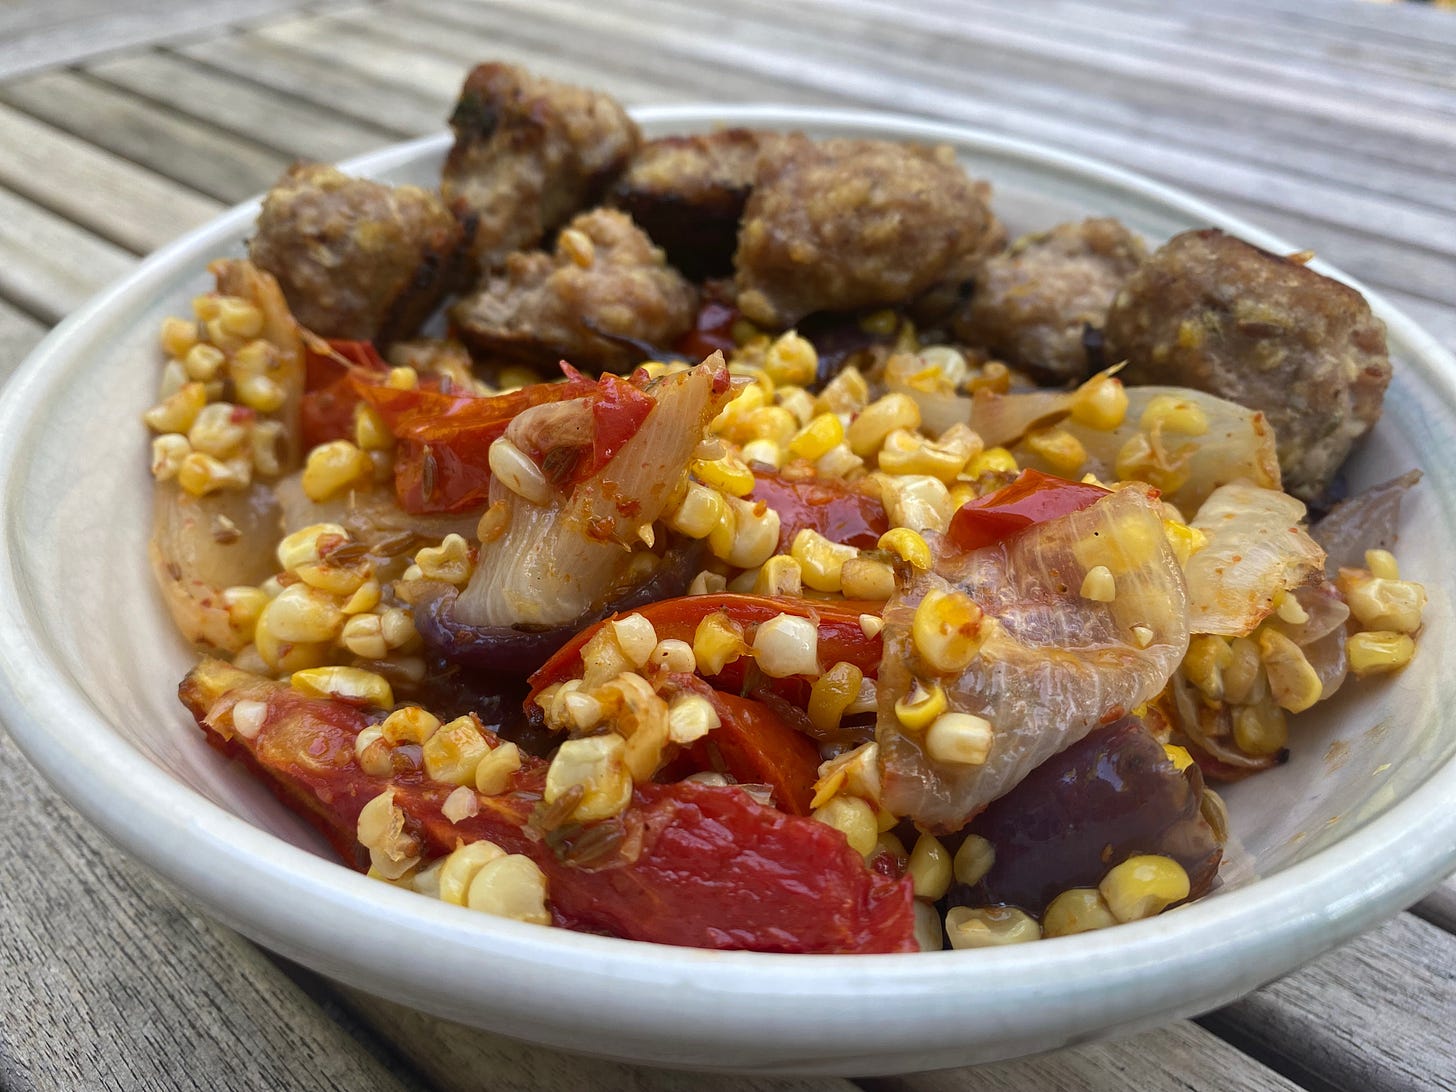 A ceramic bowl full of roasted corn, onions, and tomatoes with meatballs piled along one edge.